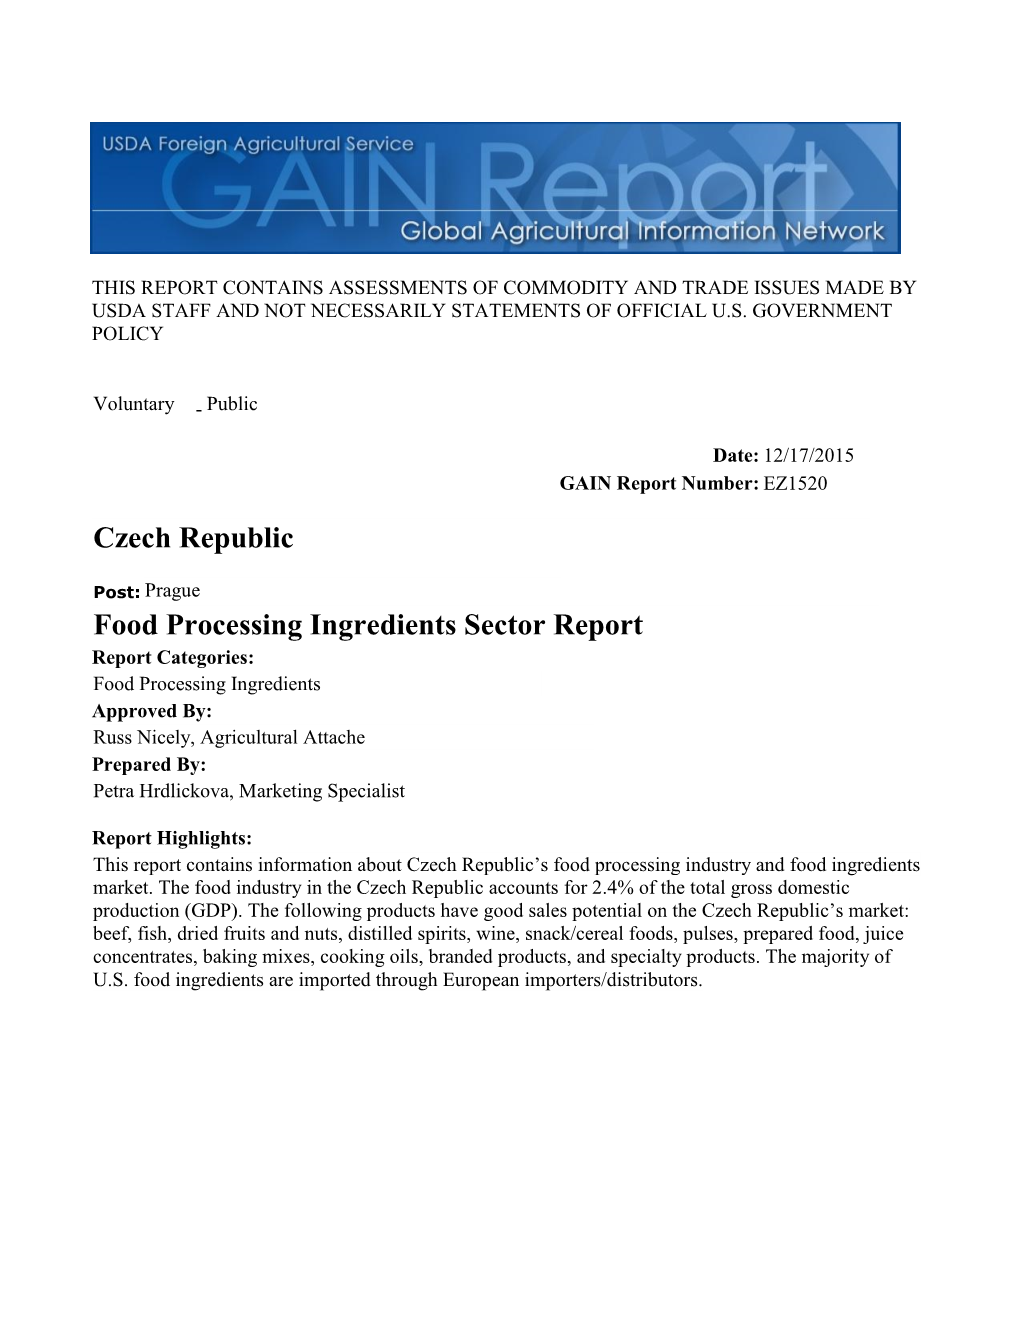 Food Processing Ingredients Sector Report Czech Republic